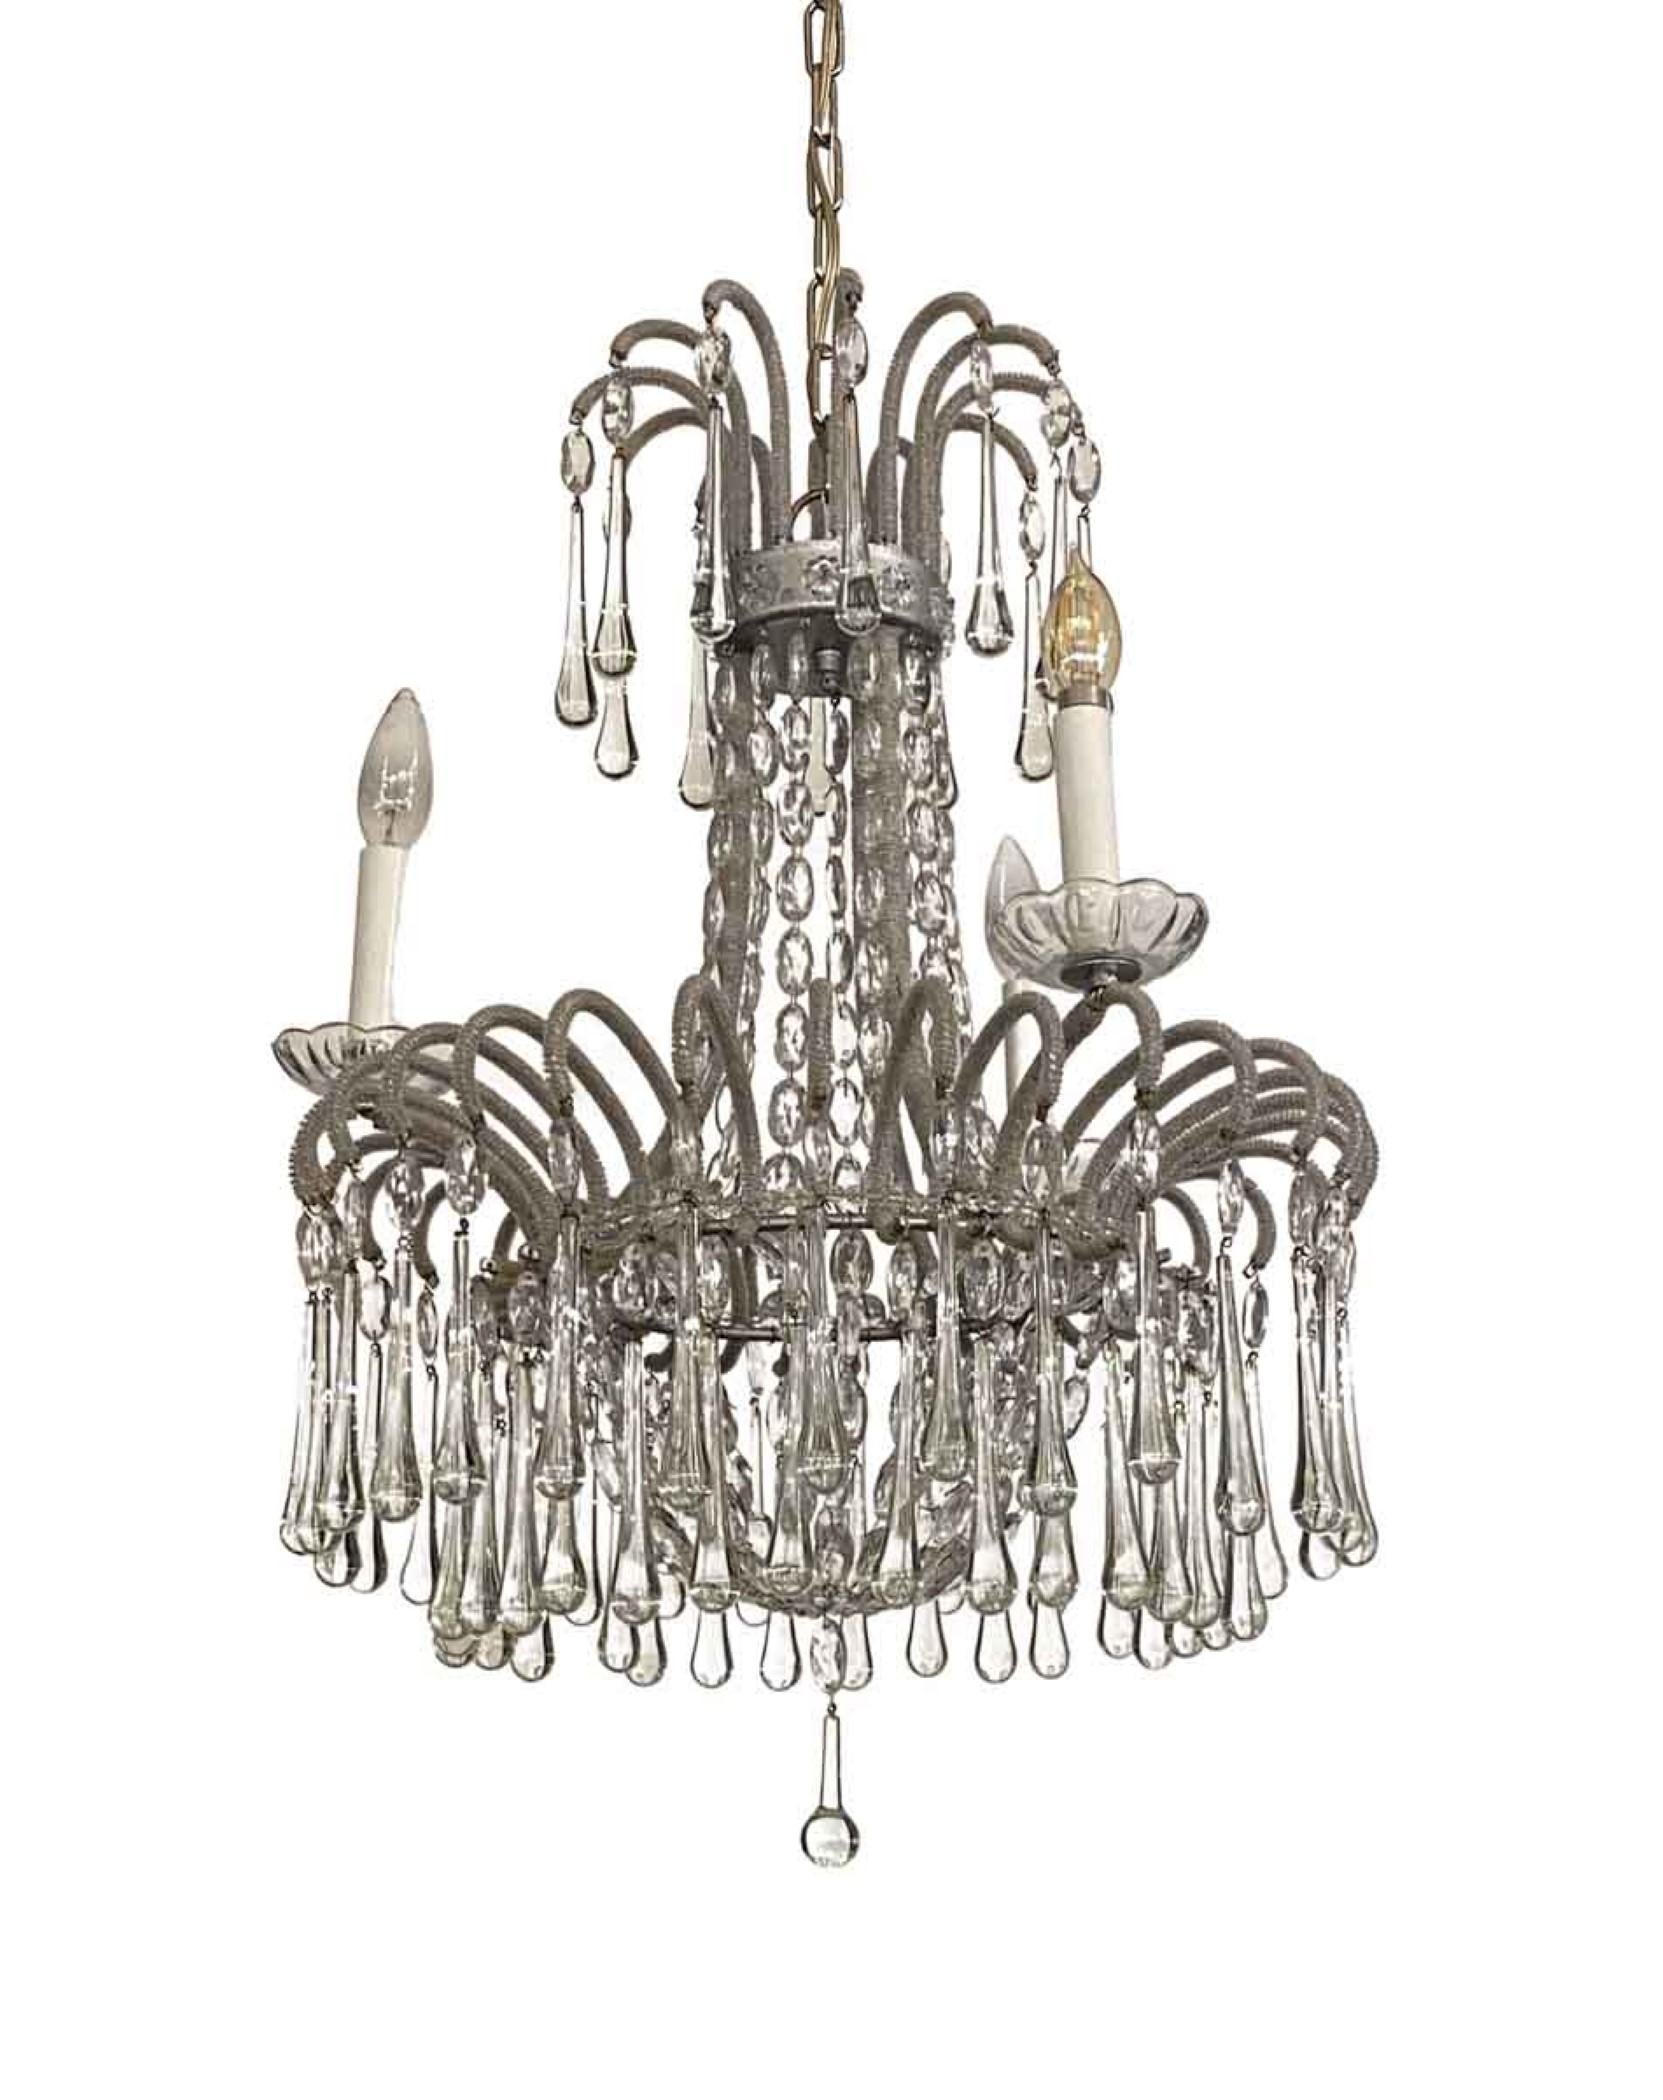 1930s Italian Venetian style teardrop crystal chandelier done in a silver leaf finish. Features three candelabra lights. Cleaned and rewired. Please note, this item is located in one of our NYC locations.